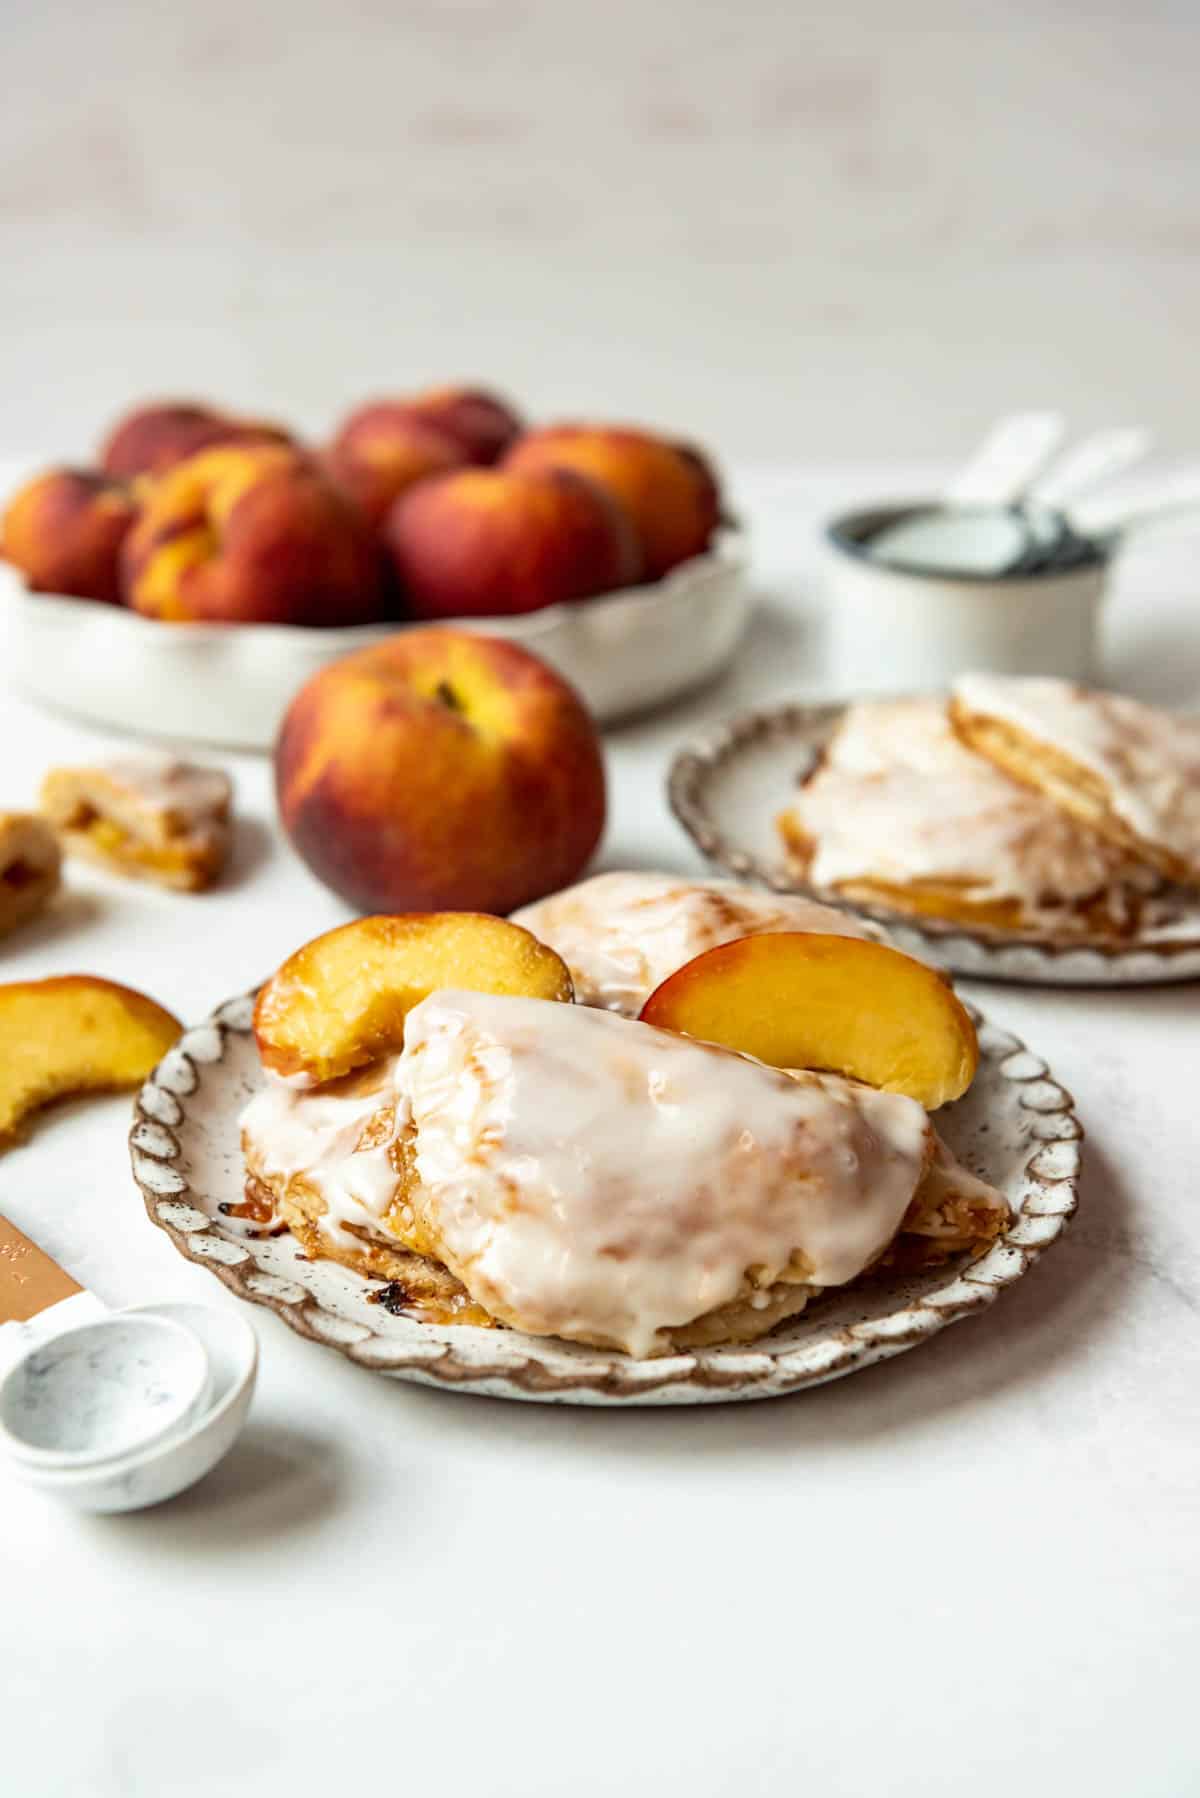 Glazed peach hand pies on a plate with a bowl of peaches behind them.